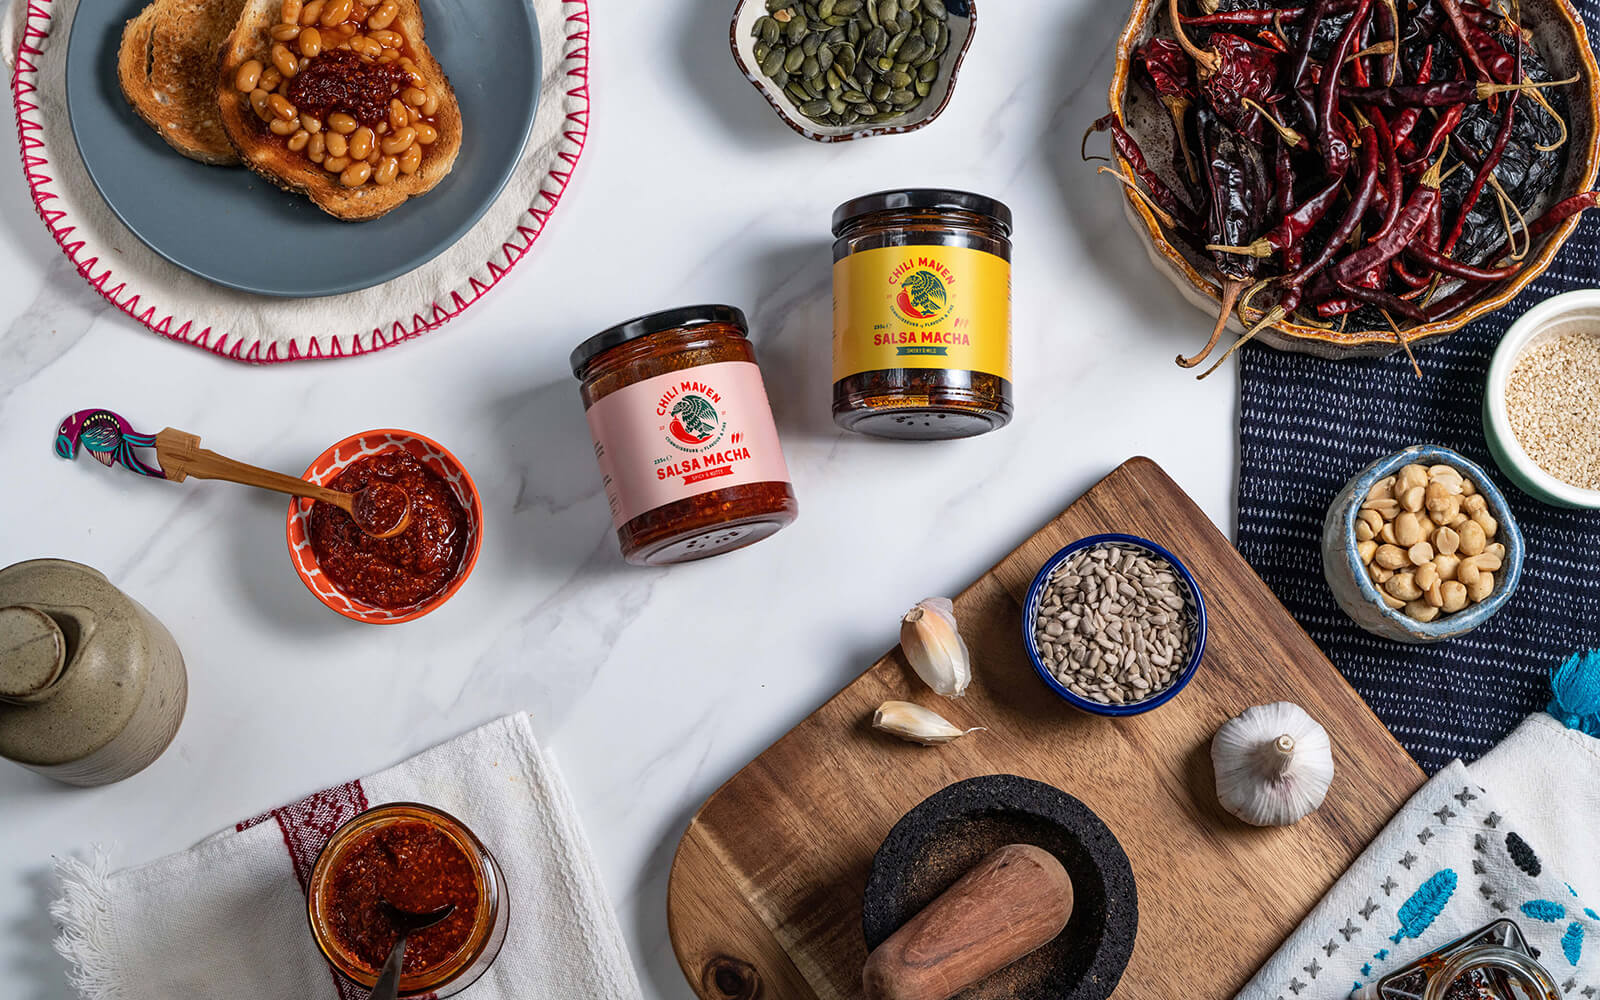 Arobase Creative Helps Chili Maven Bring Mexican Magic to the UK Market